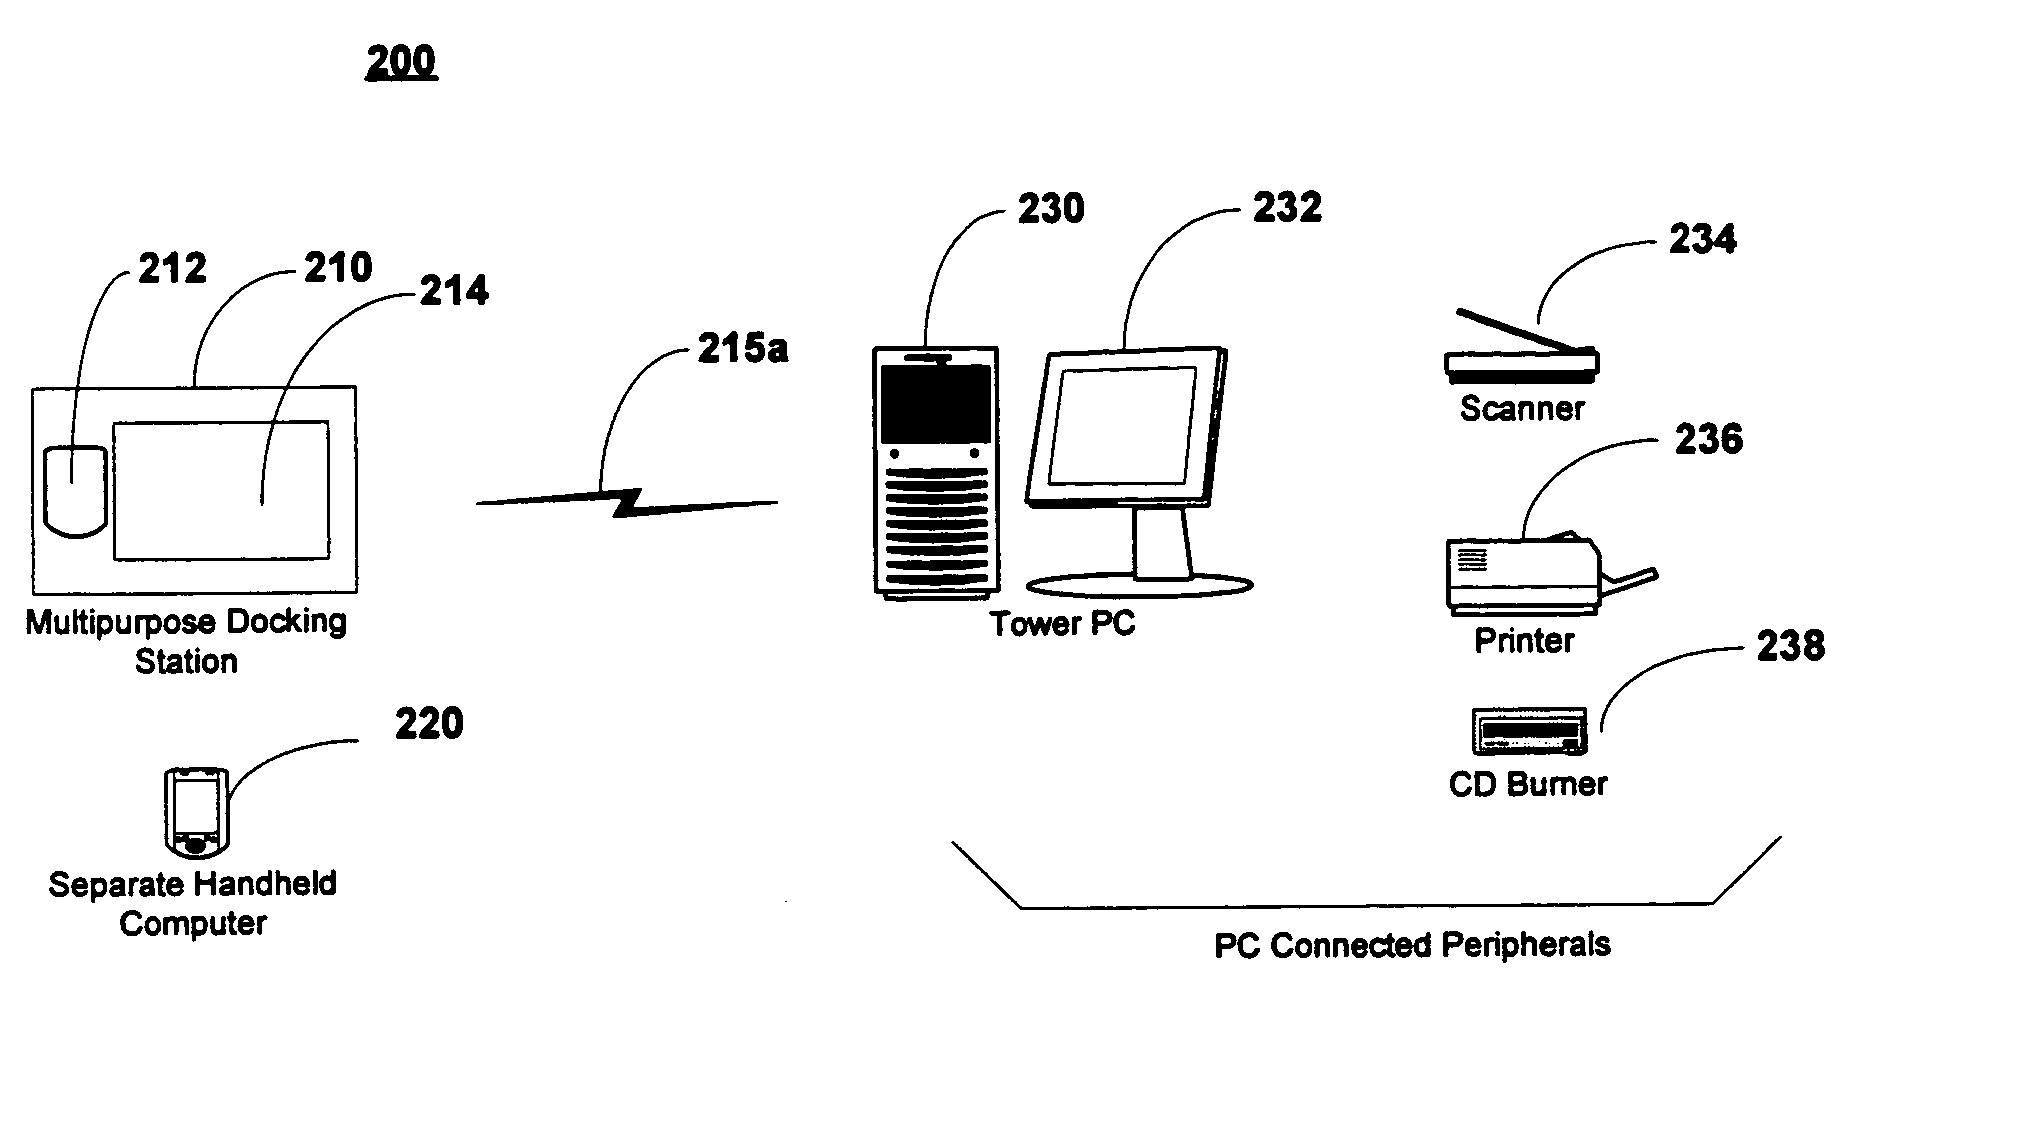 Multipurpose docking apparatus for a mobile computer